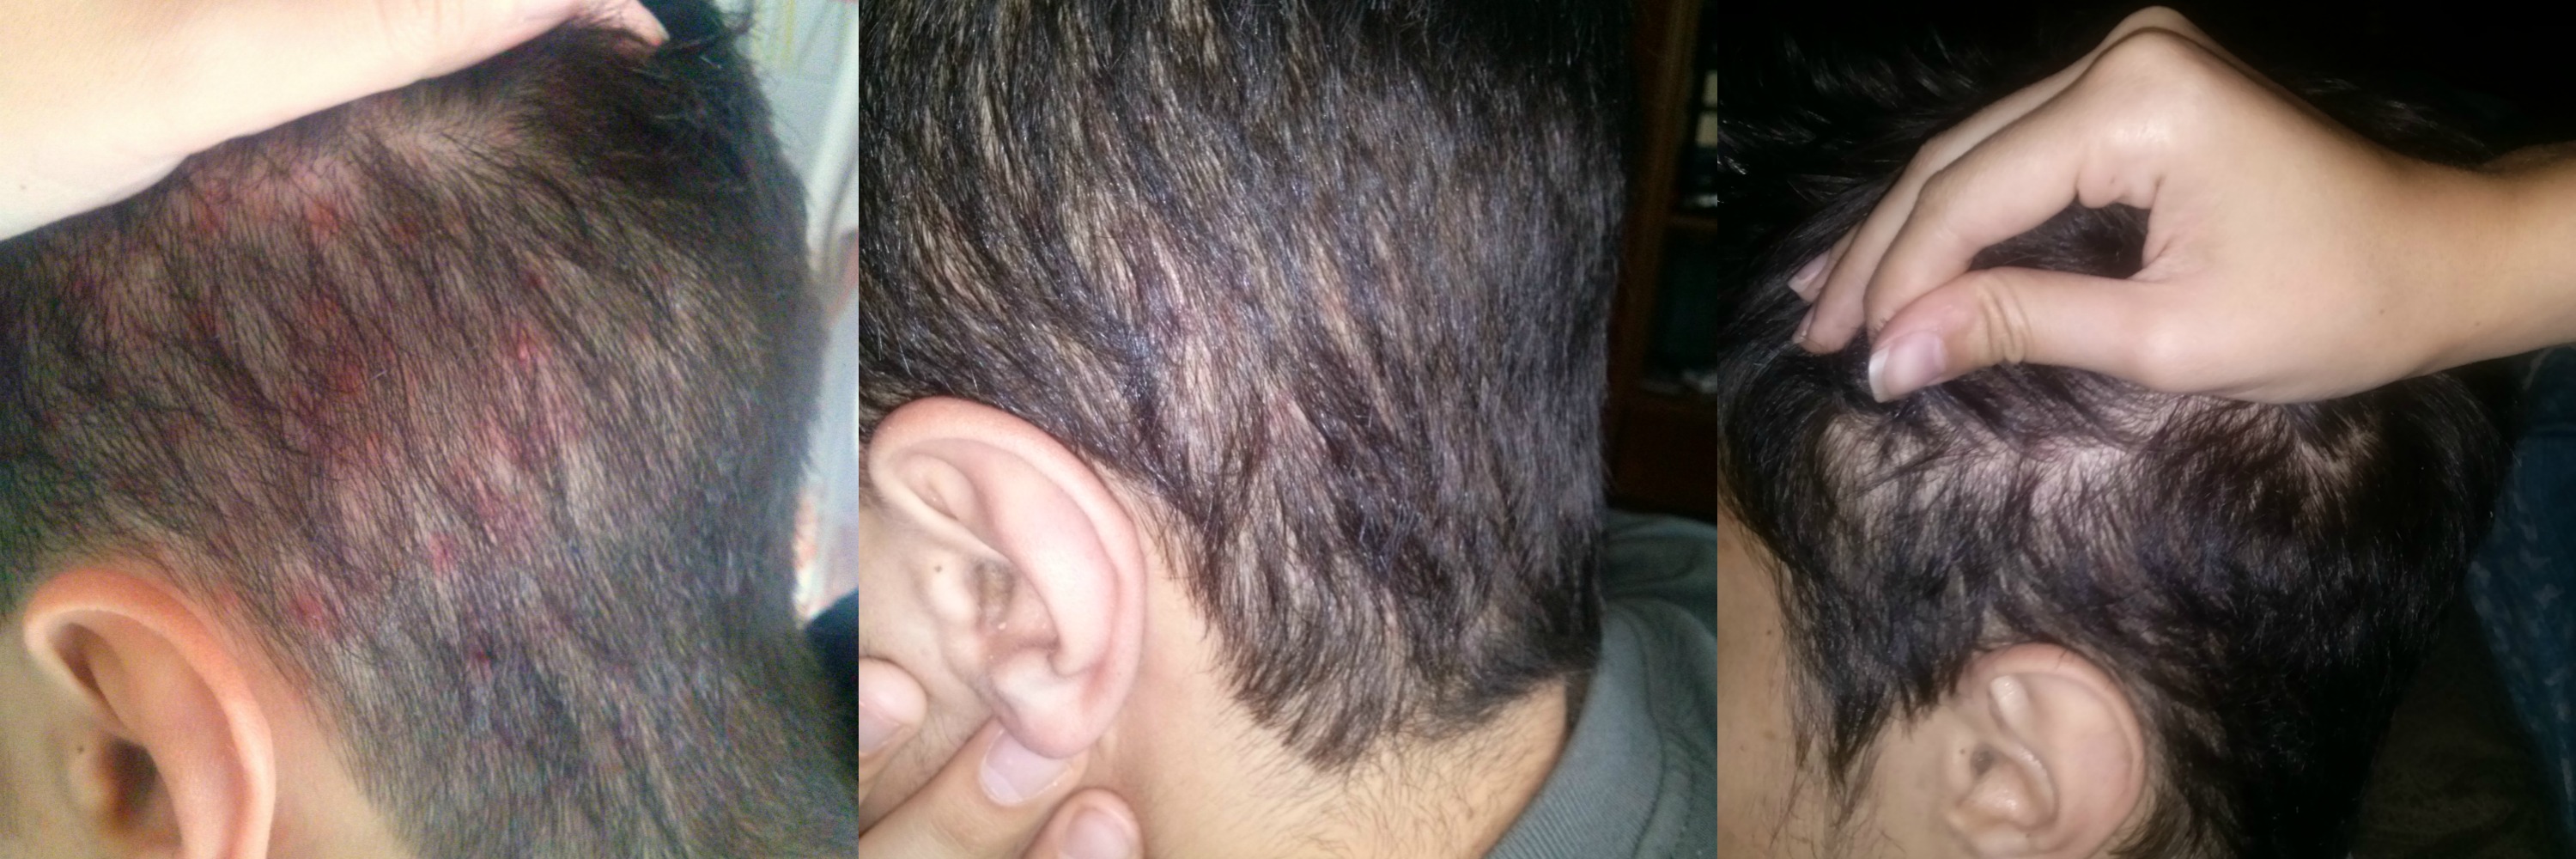 Seb Dermatitis Gone In 4 Weeks With TLC Naturals Scalp Therapy